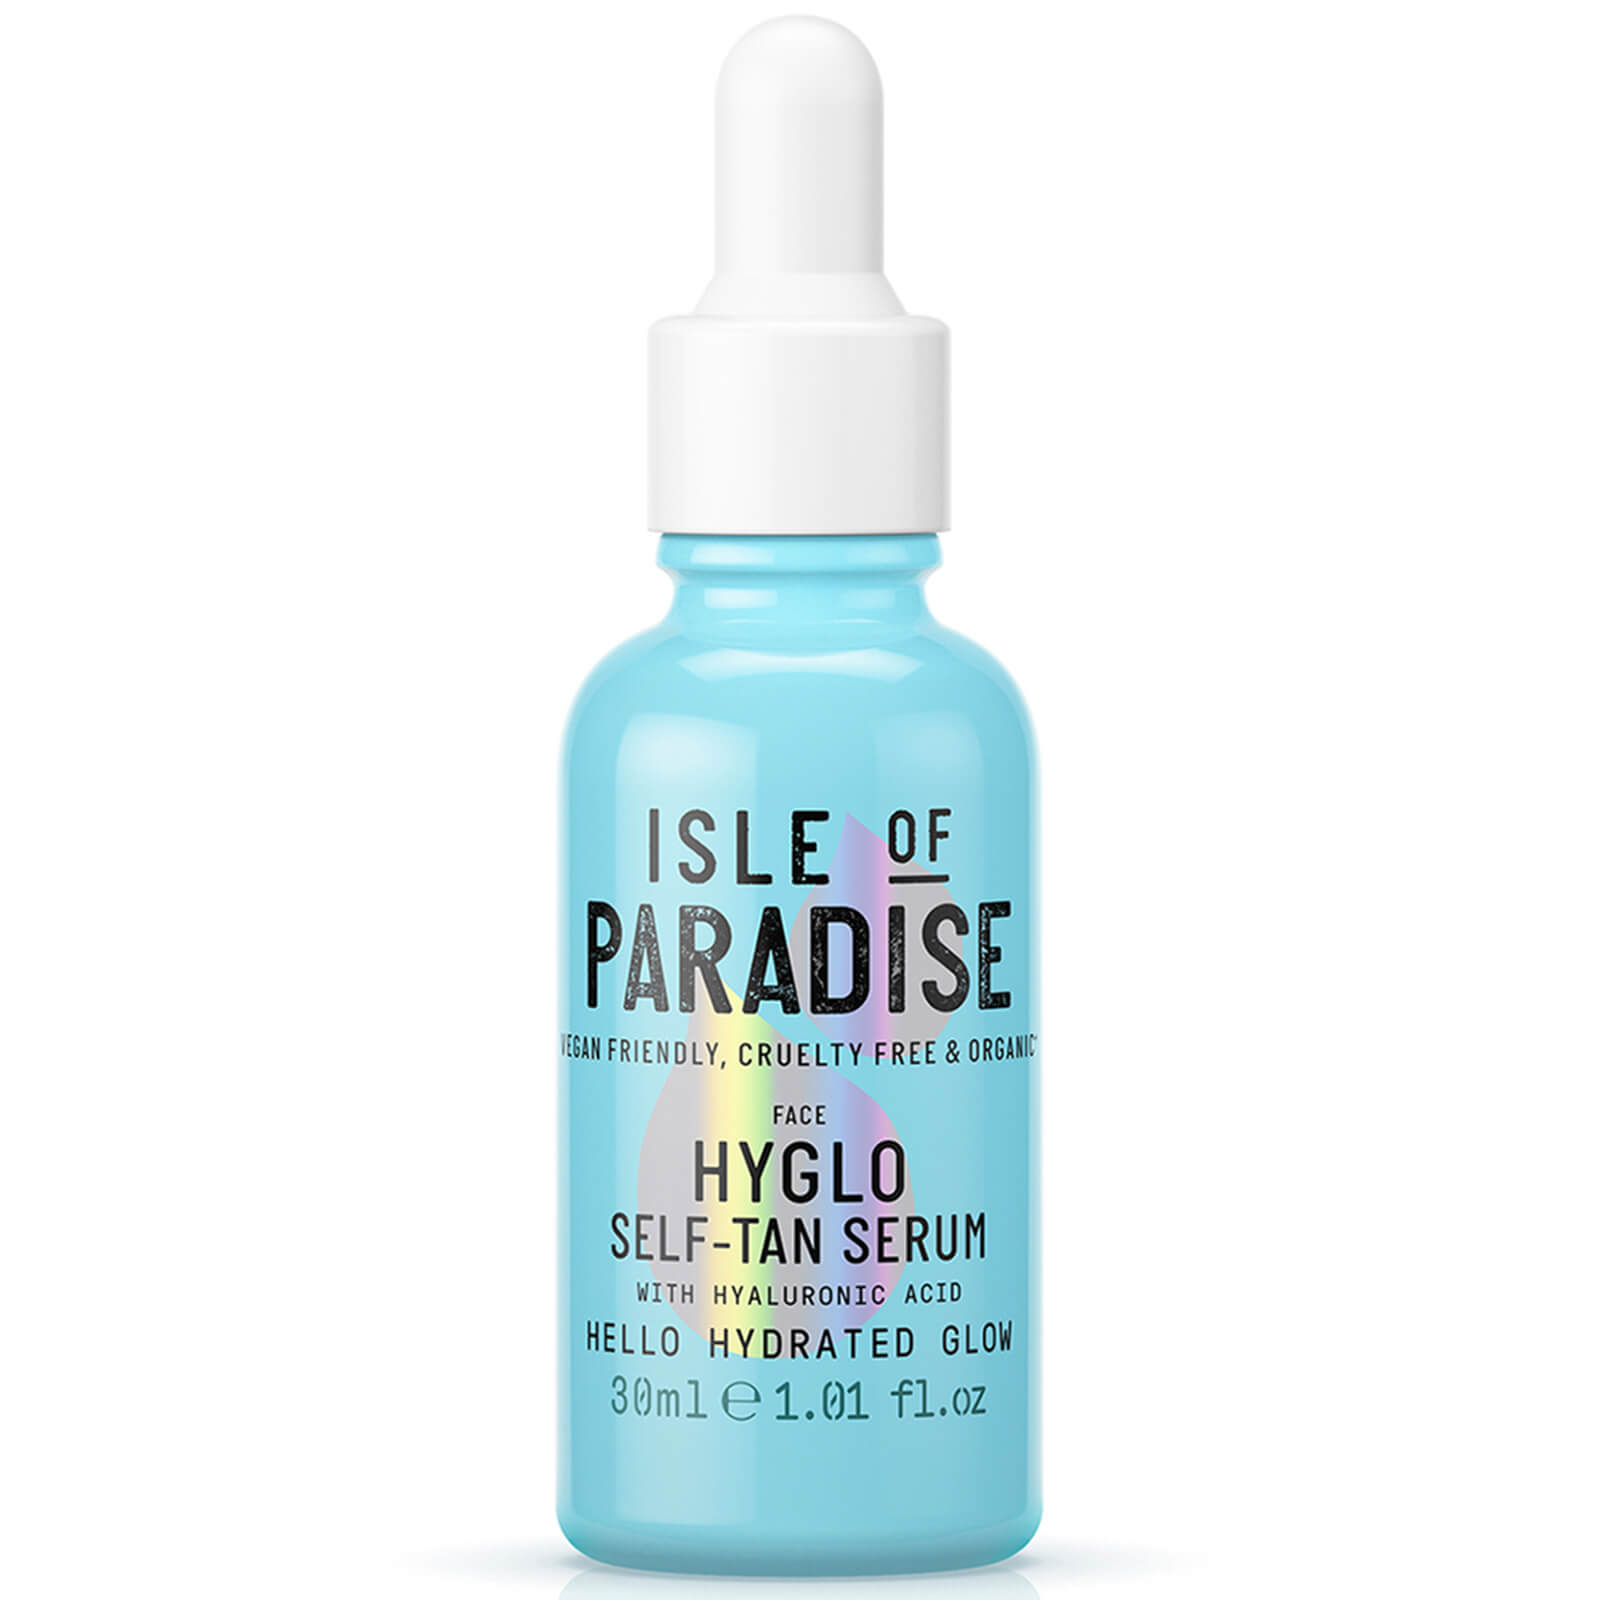 Image of Isle of Paradise HYGLO Hyaluronic Self-Tan Serum for Face 30ml